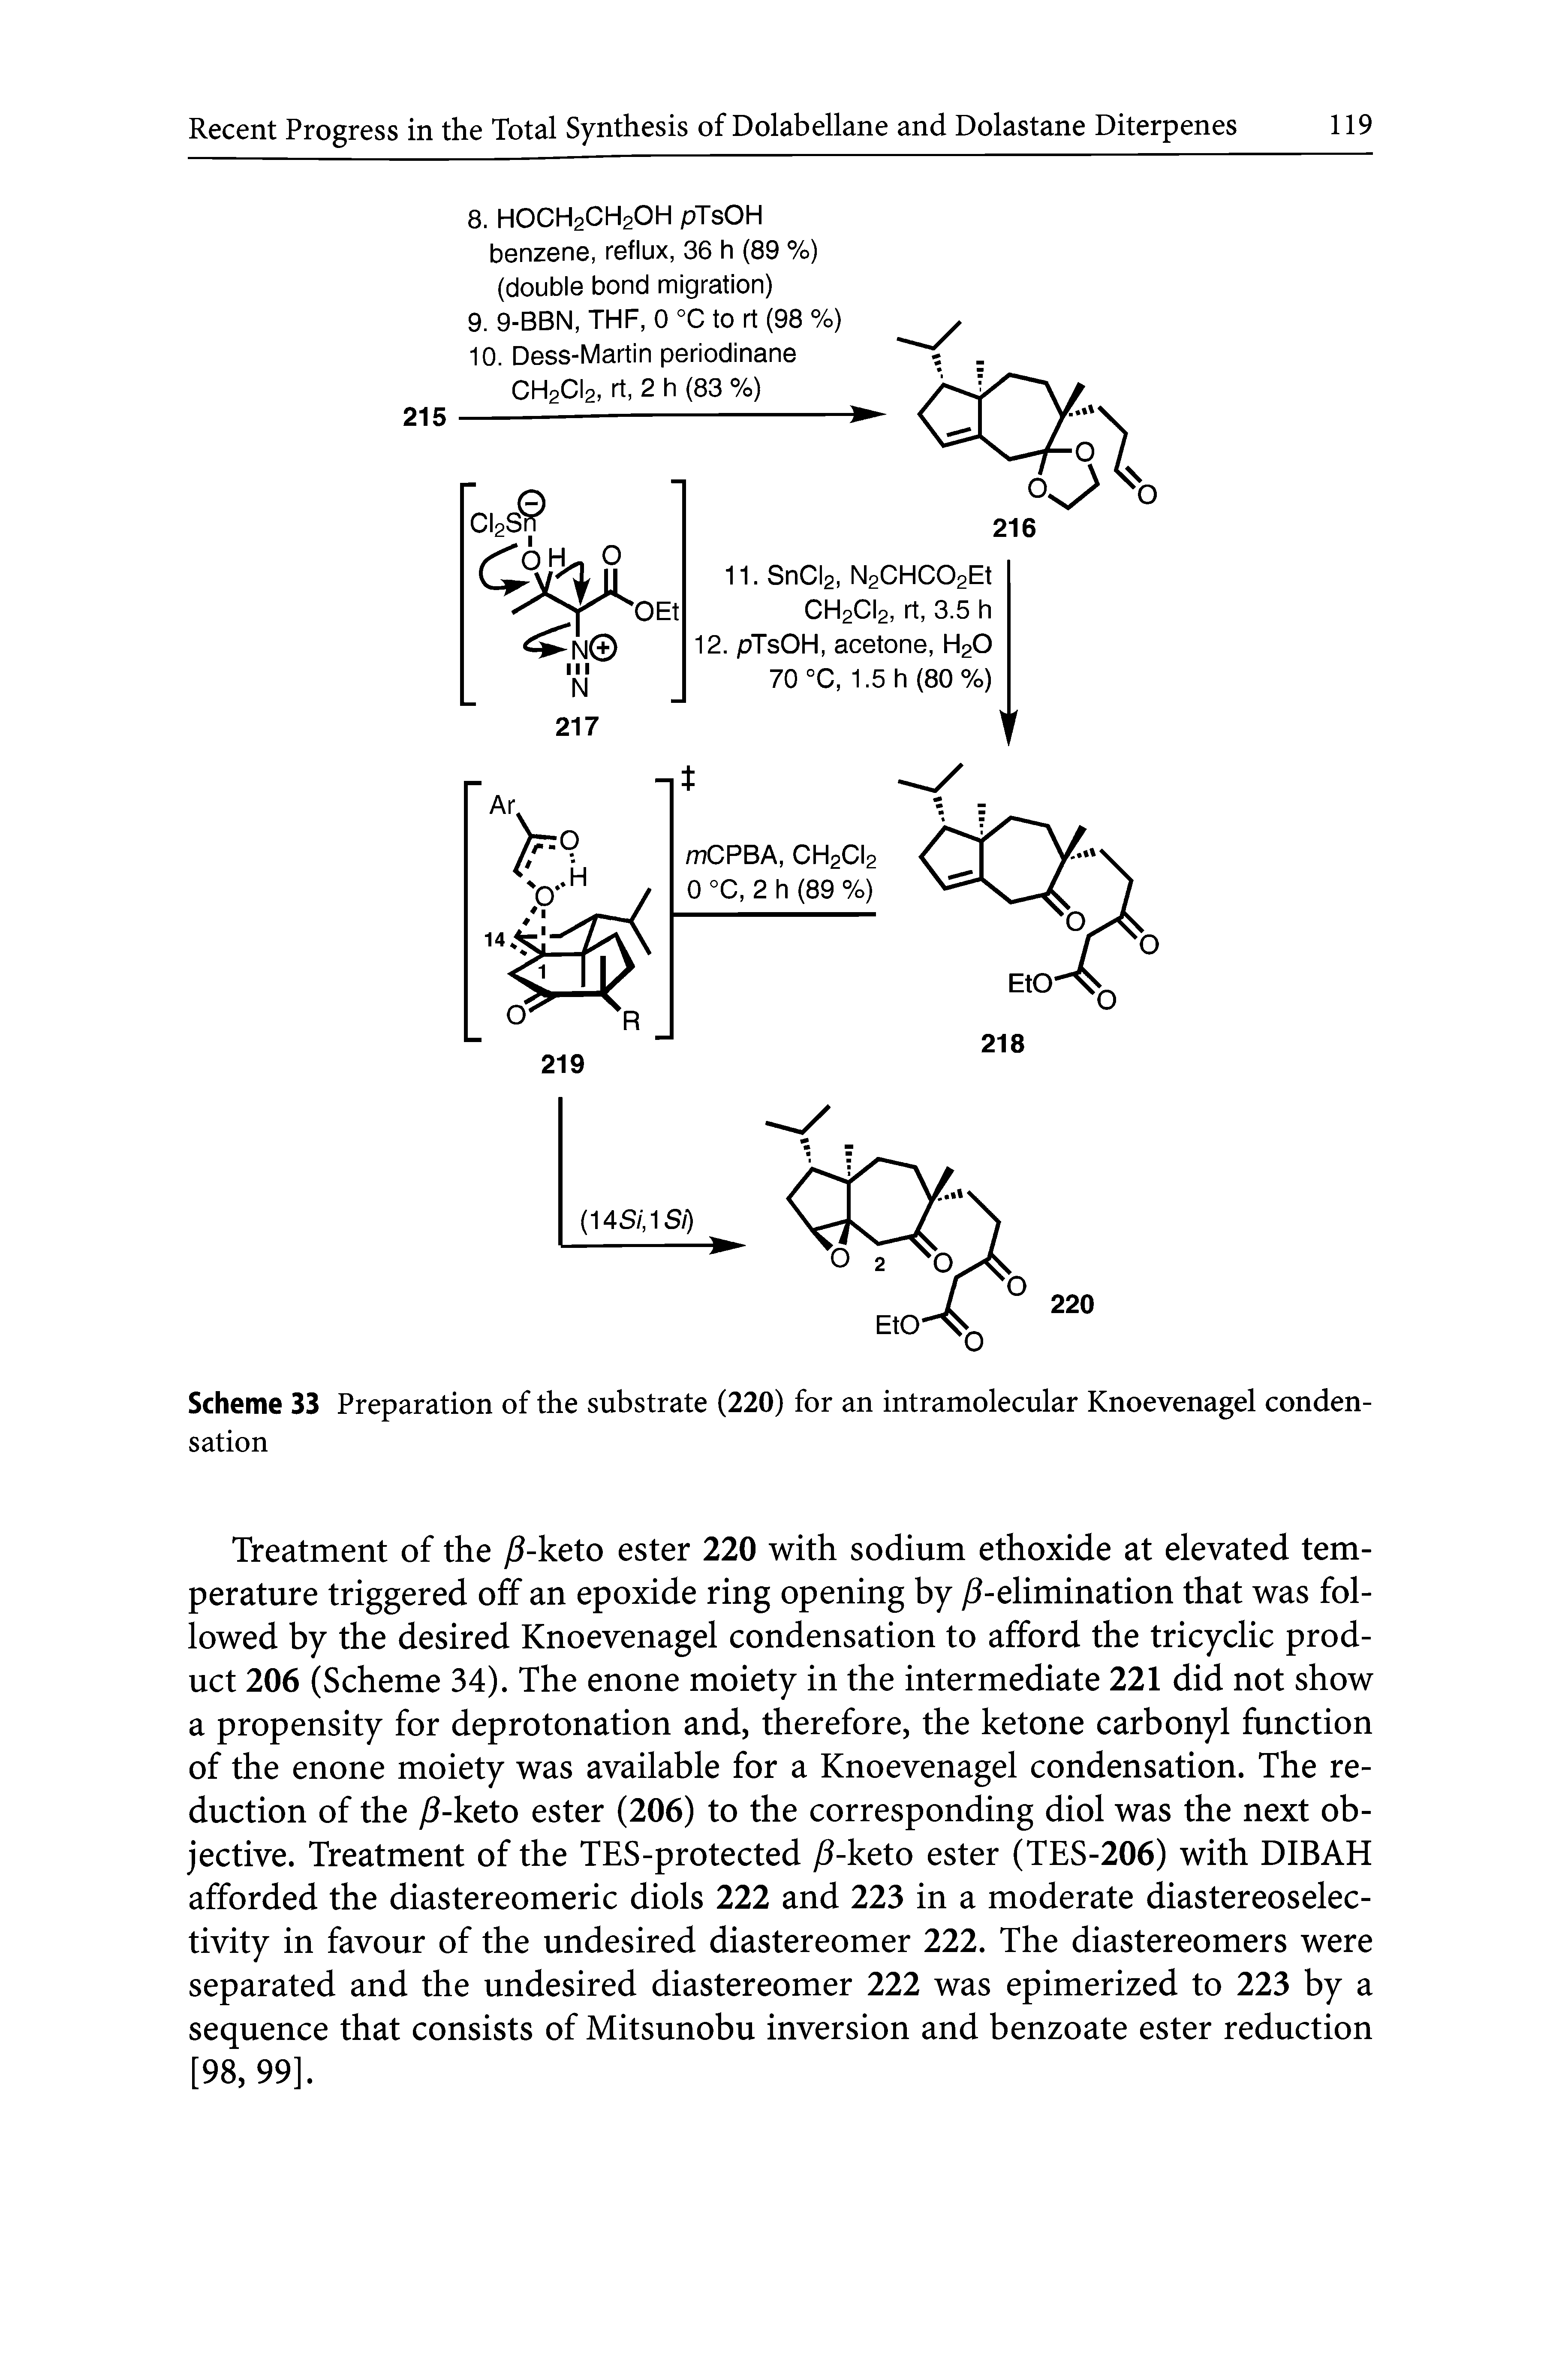 Scheme 33 Preparation of the substrate (220) for an intramolecular Knoevenagel condensation...